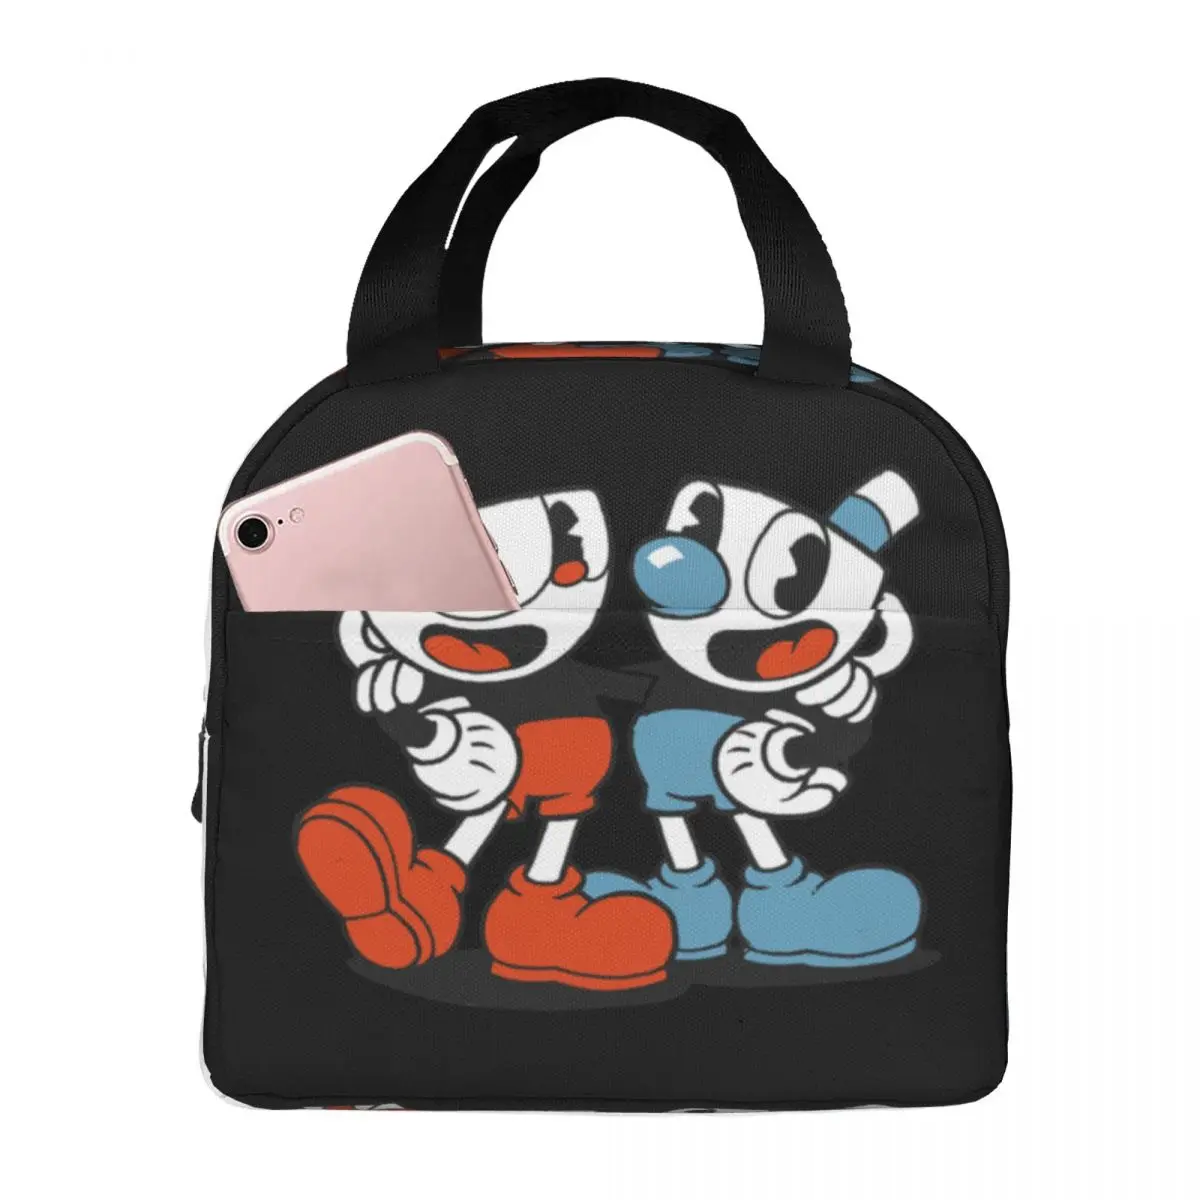 Lunch Bag for Men Women Cuphead Insulated Cooler Bag Portable Picnic Game Mugman Cup Mouse Oxford Lunch Box Food Storage Bags